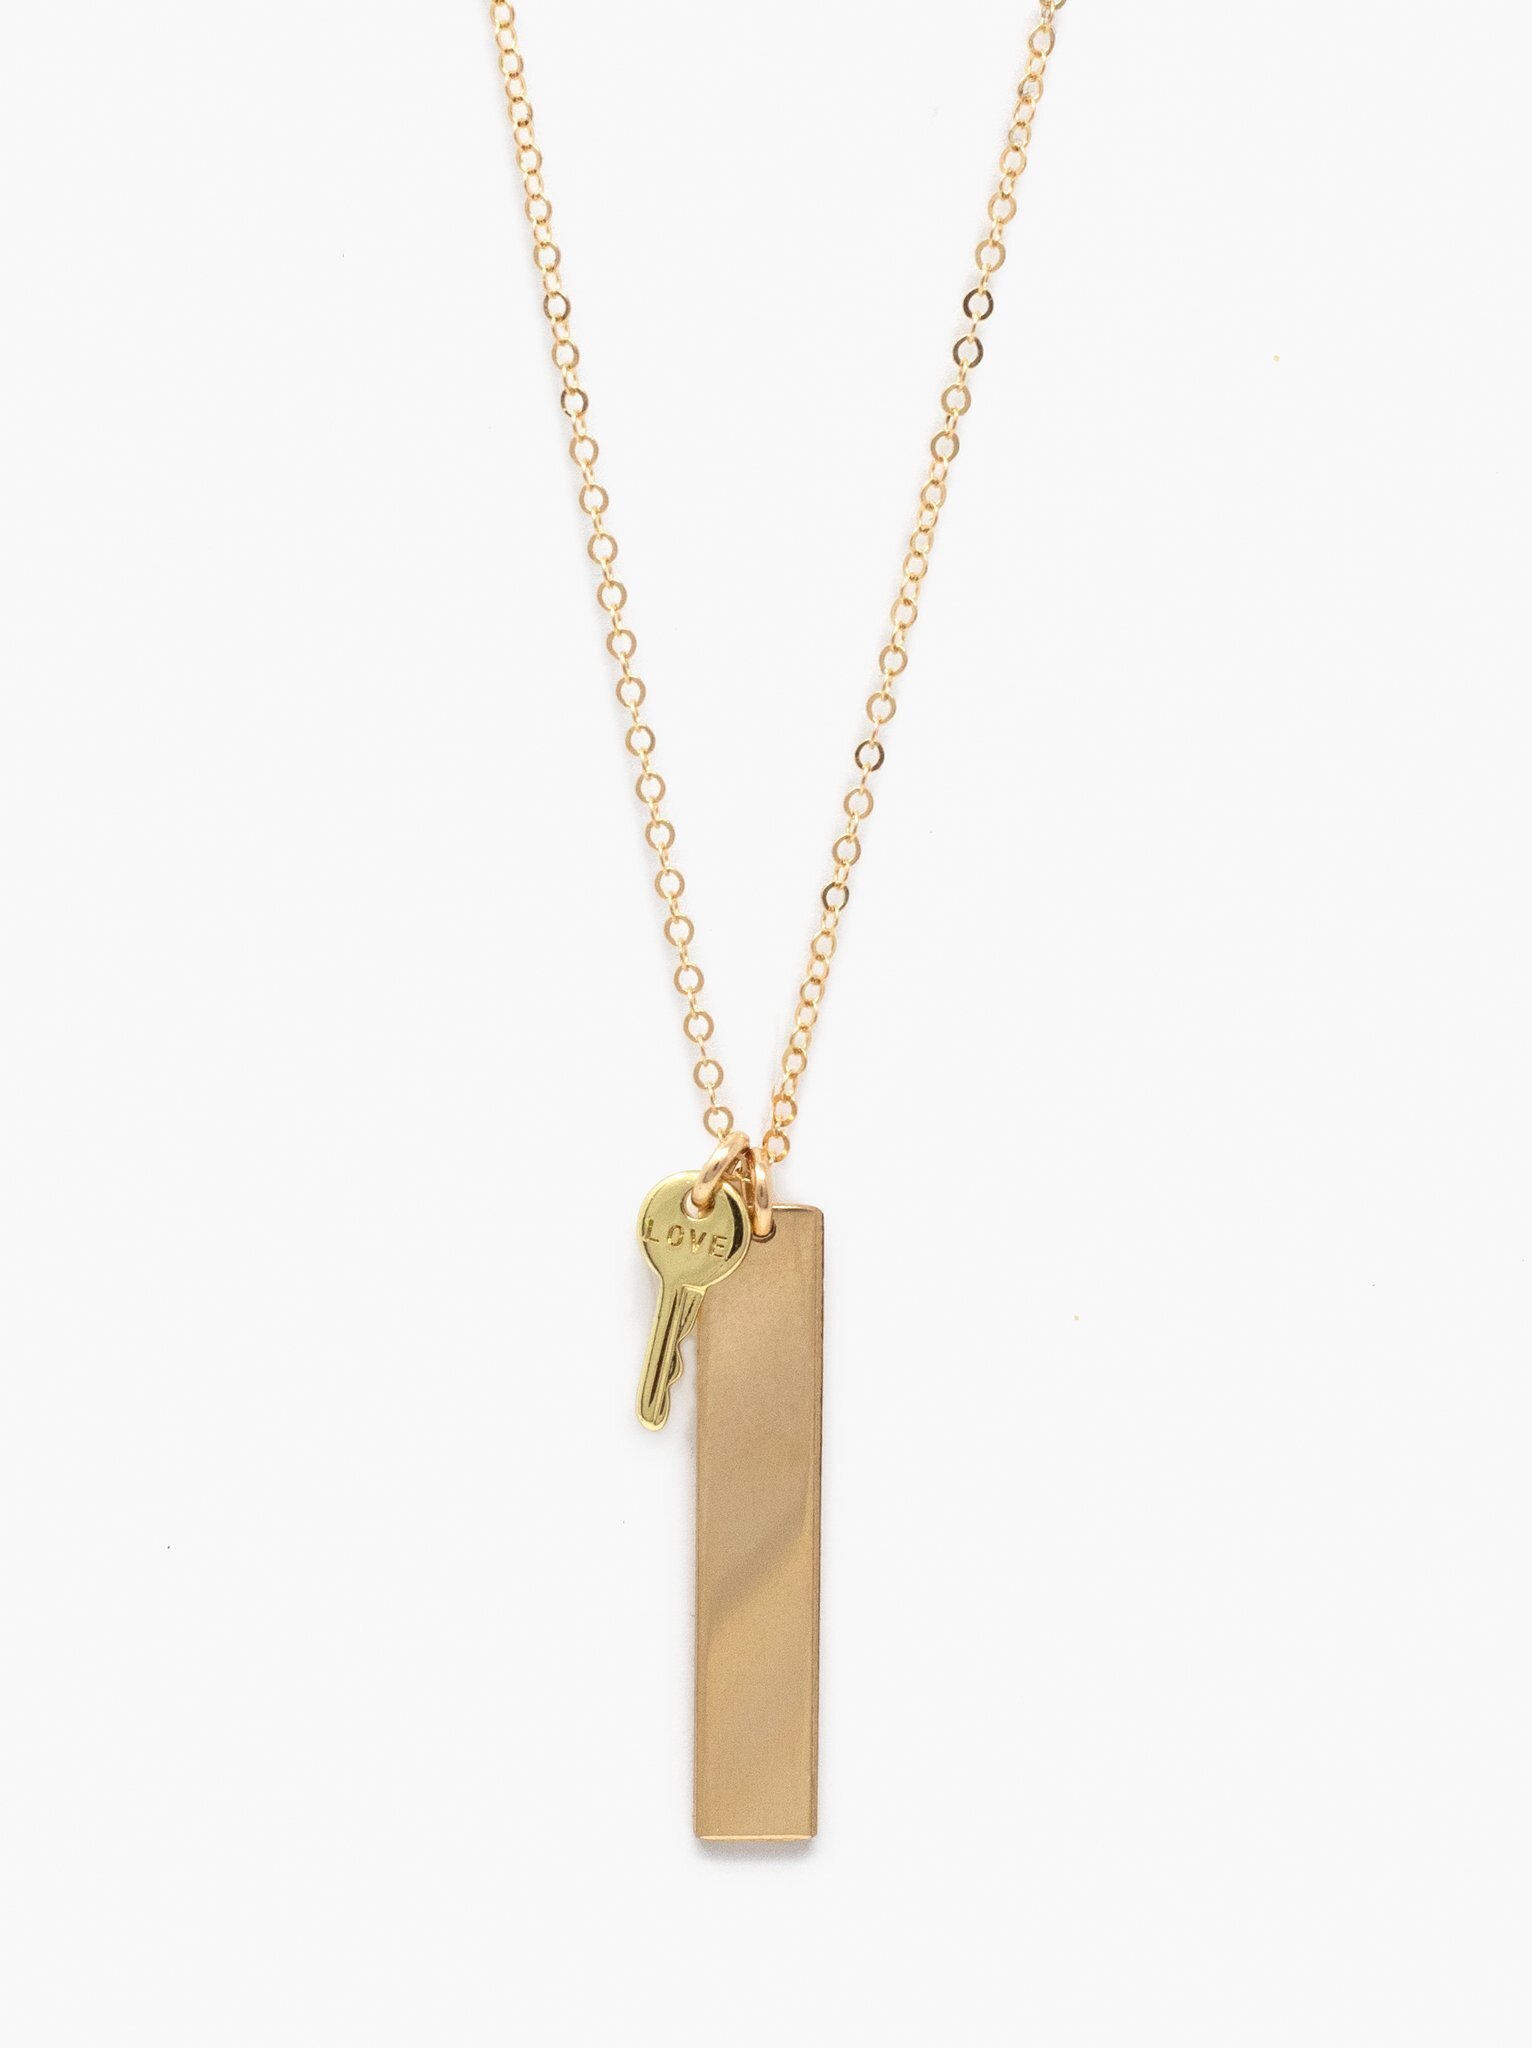 H19_Provision-Necklace_Gold_2048x2048.jpg